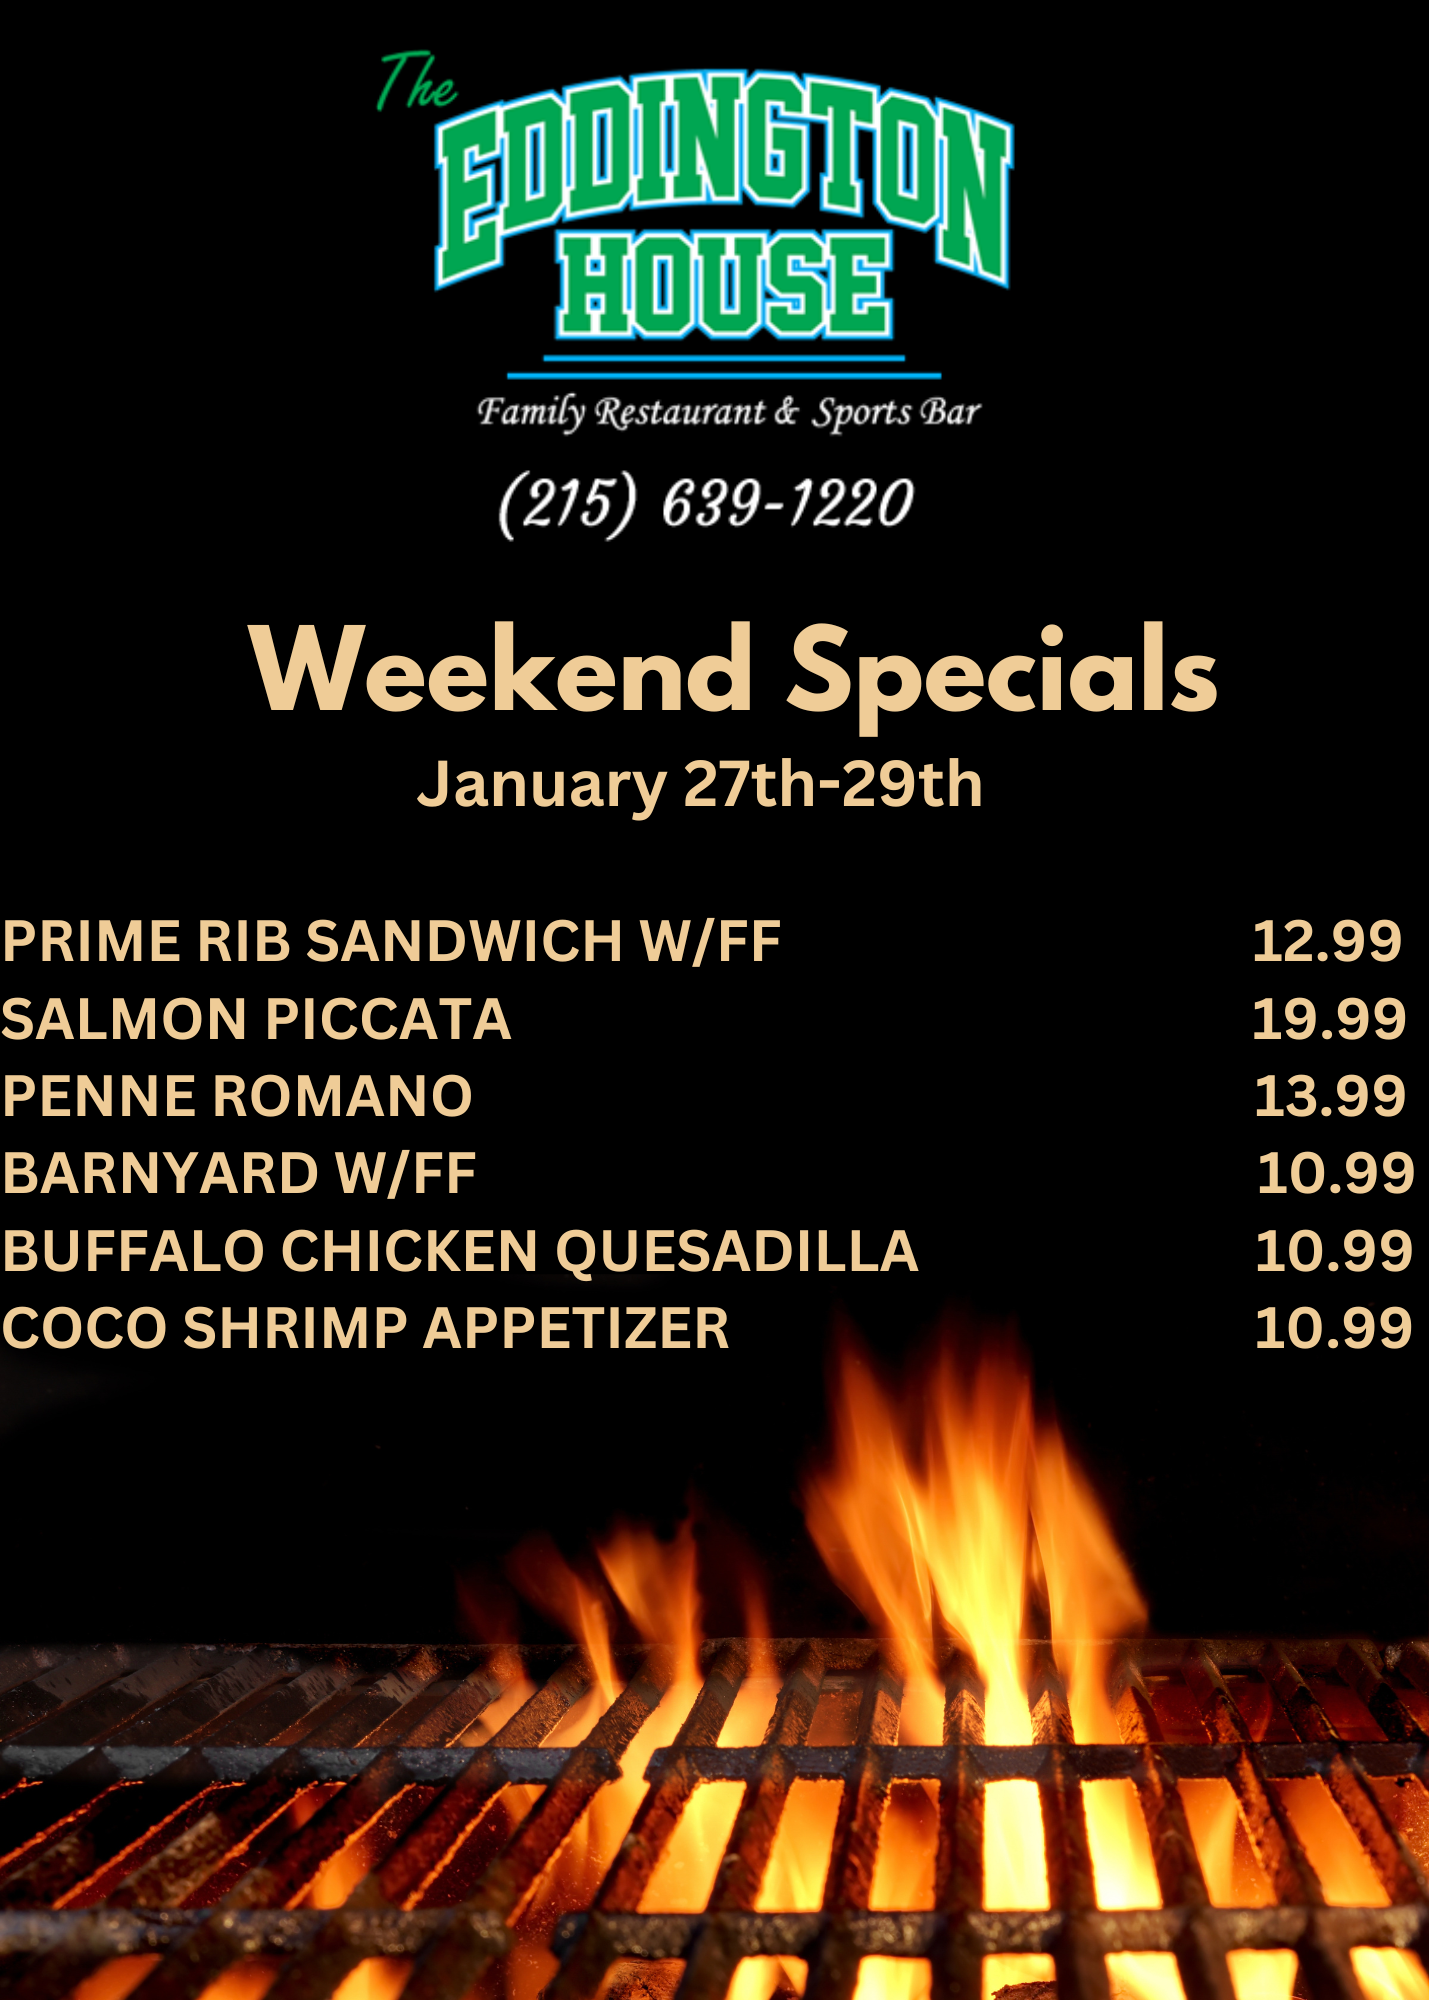 _1-27-23 EHouse Weekend Specials